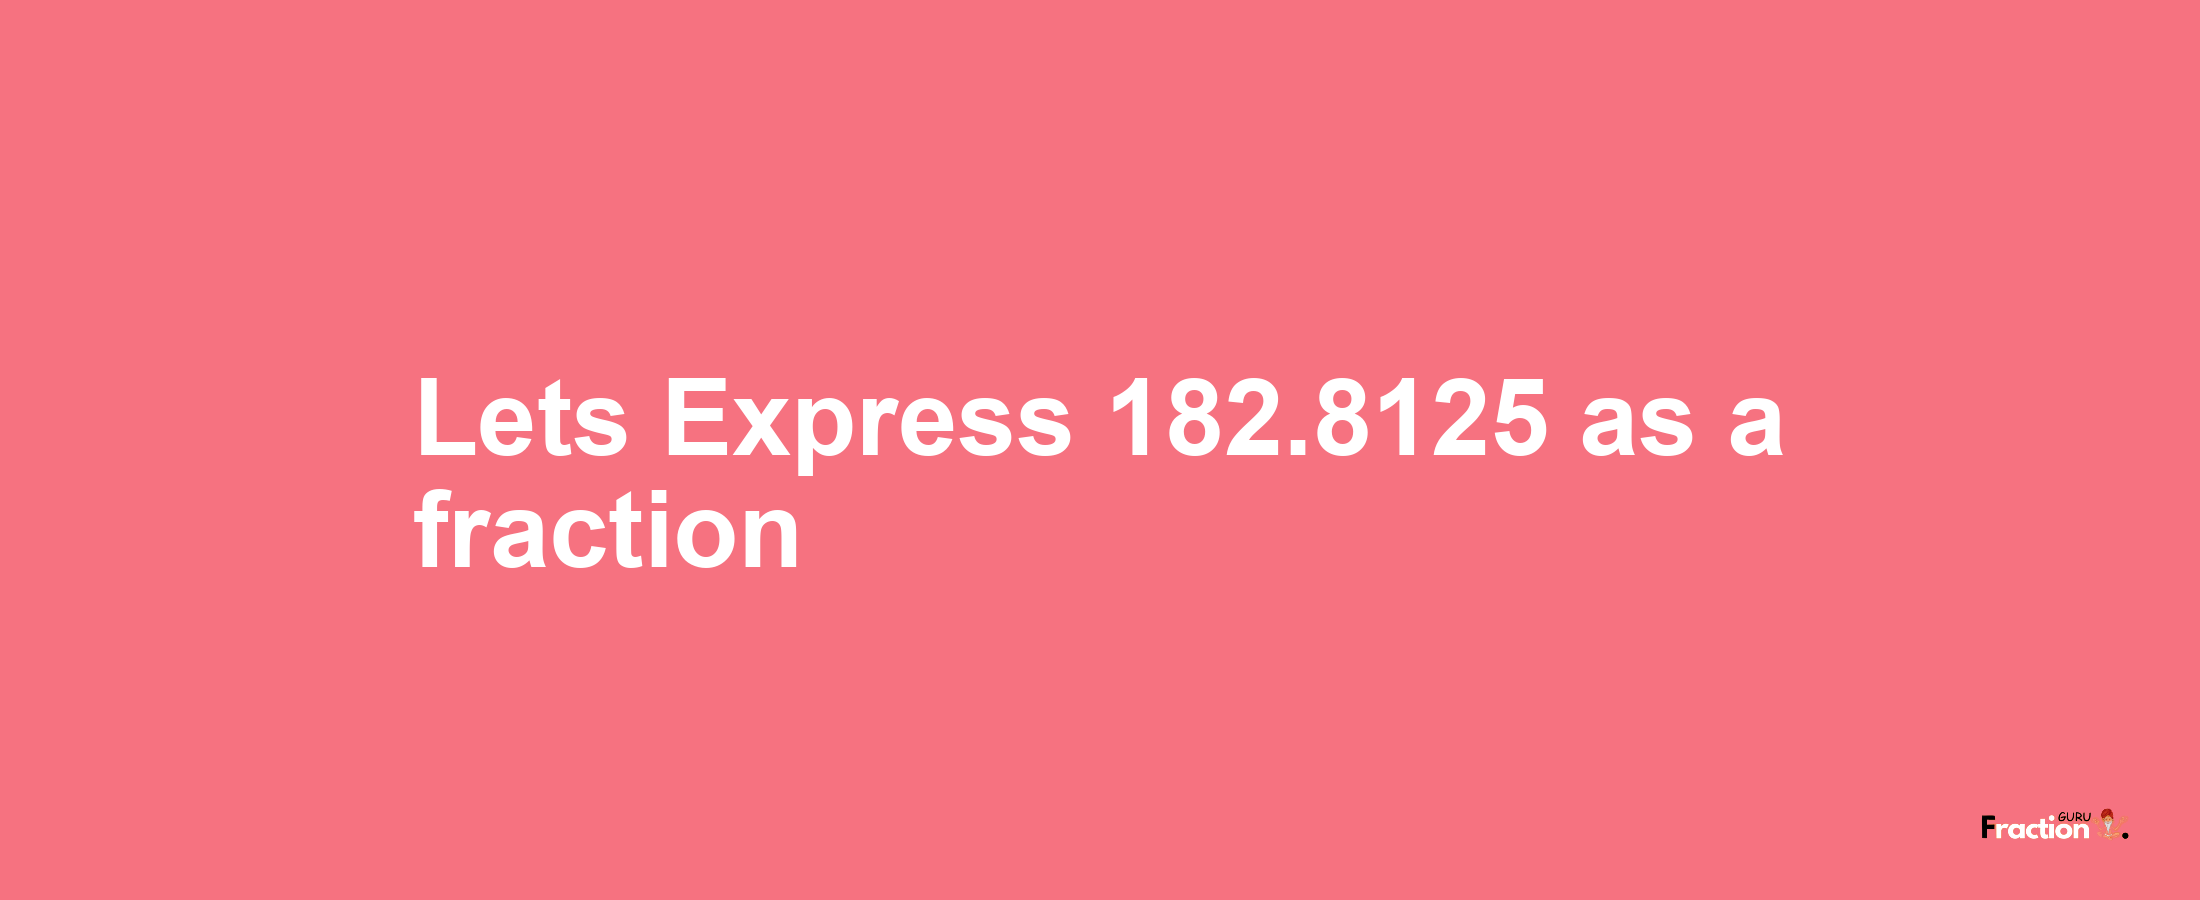 Lets Express 182.8125 as afraction